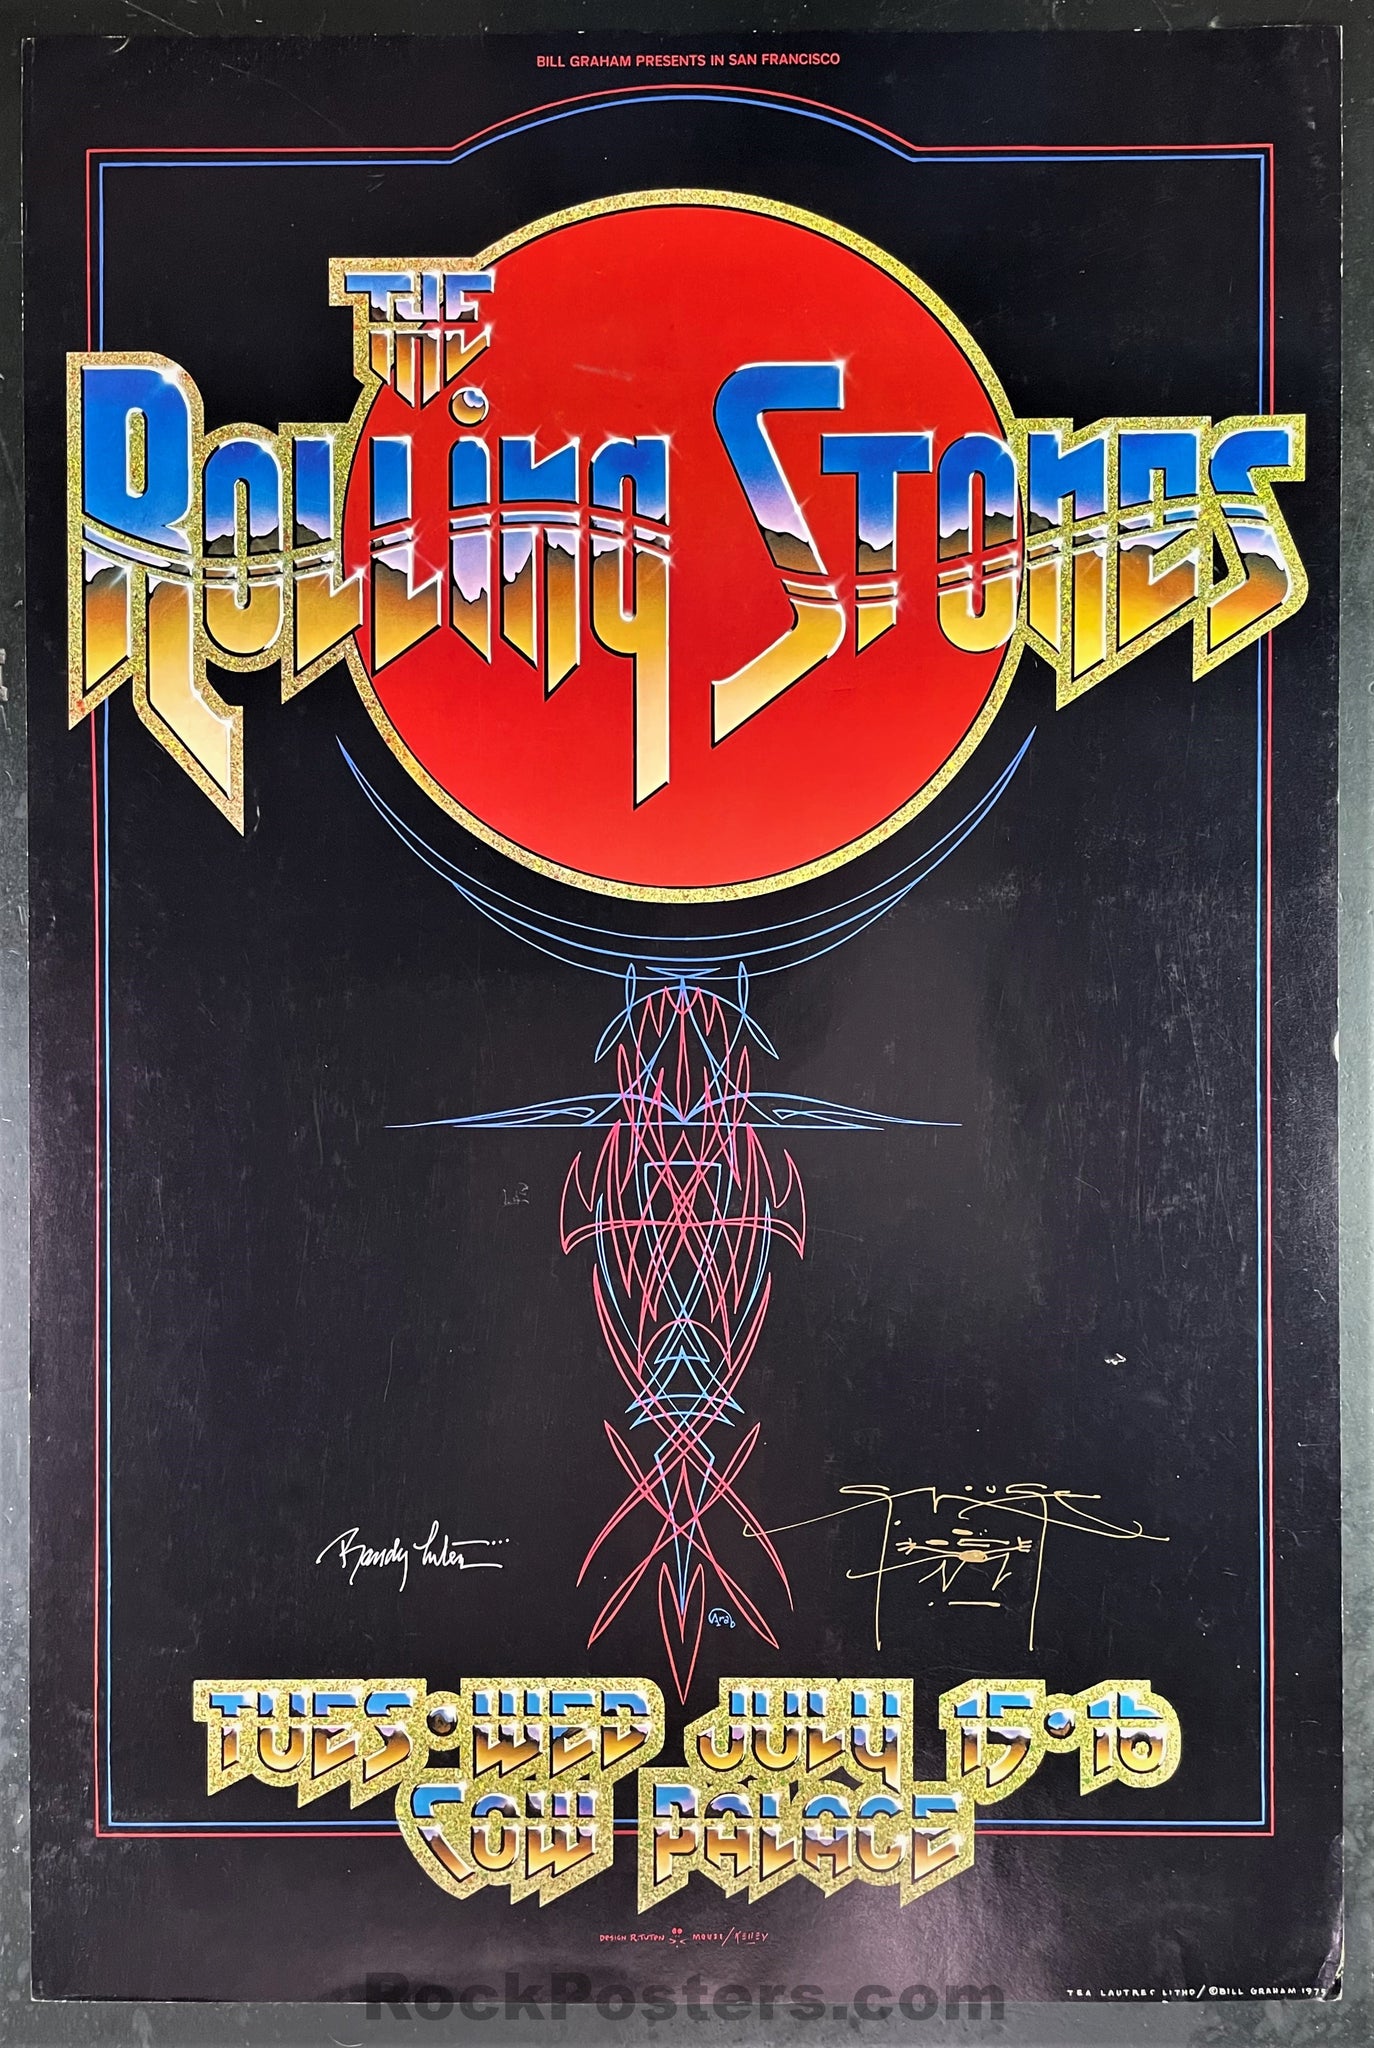 AUCTION - AOR-4.41 - The Rolling Stones - Mouse & Tuten Signed - 1975 Poster - Cow Palace - Excellent